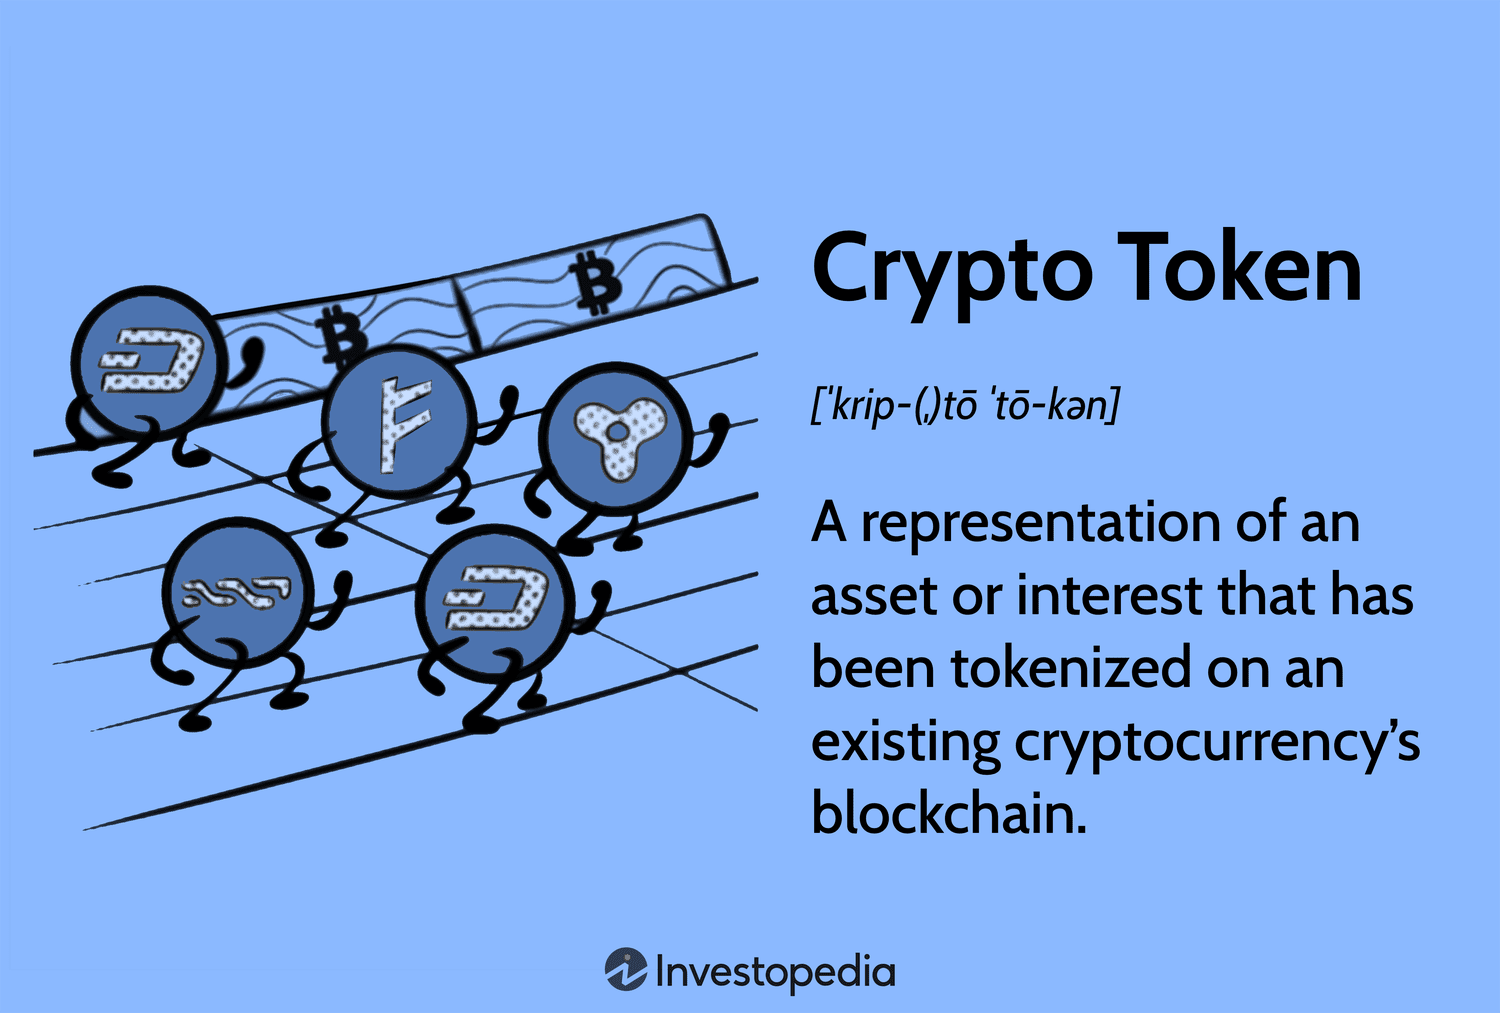 Crypto Coins and Tokens: Their Use-Cases Explained | Ledger